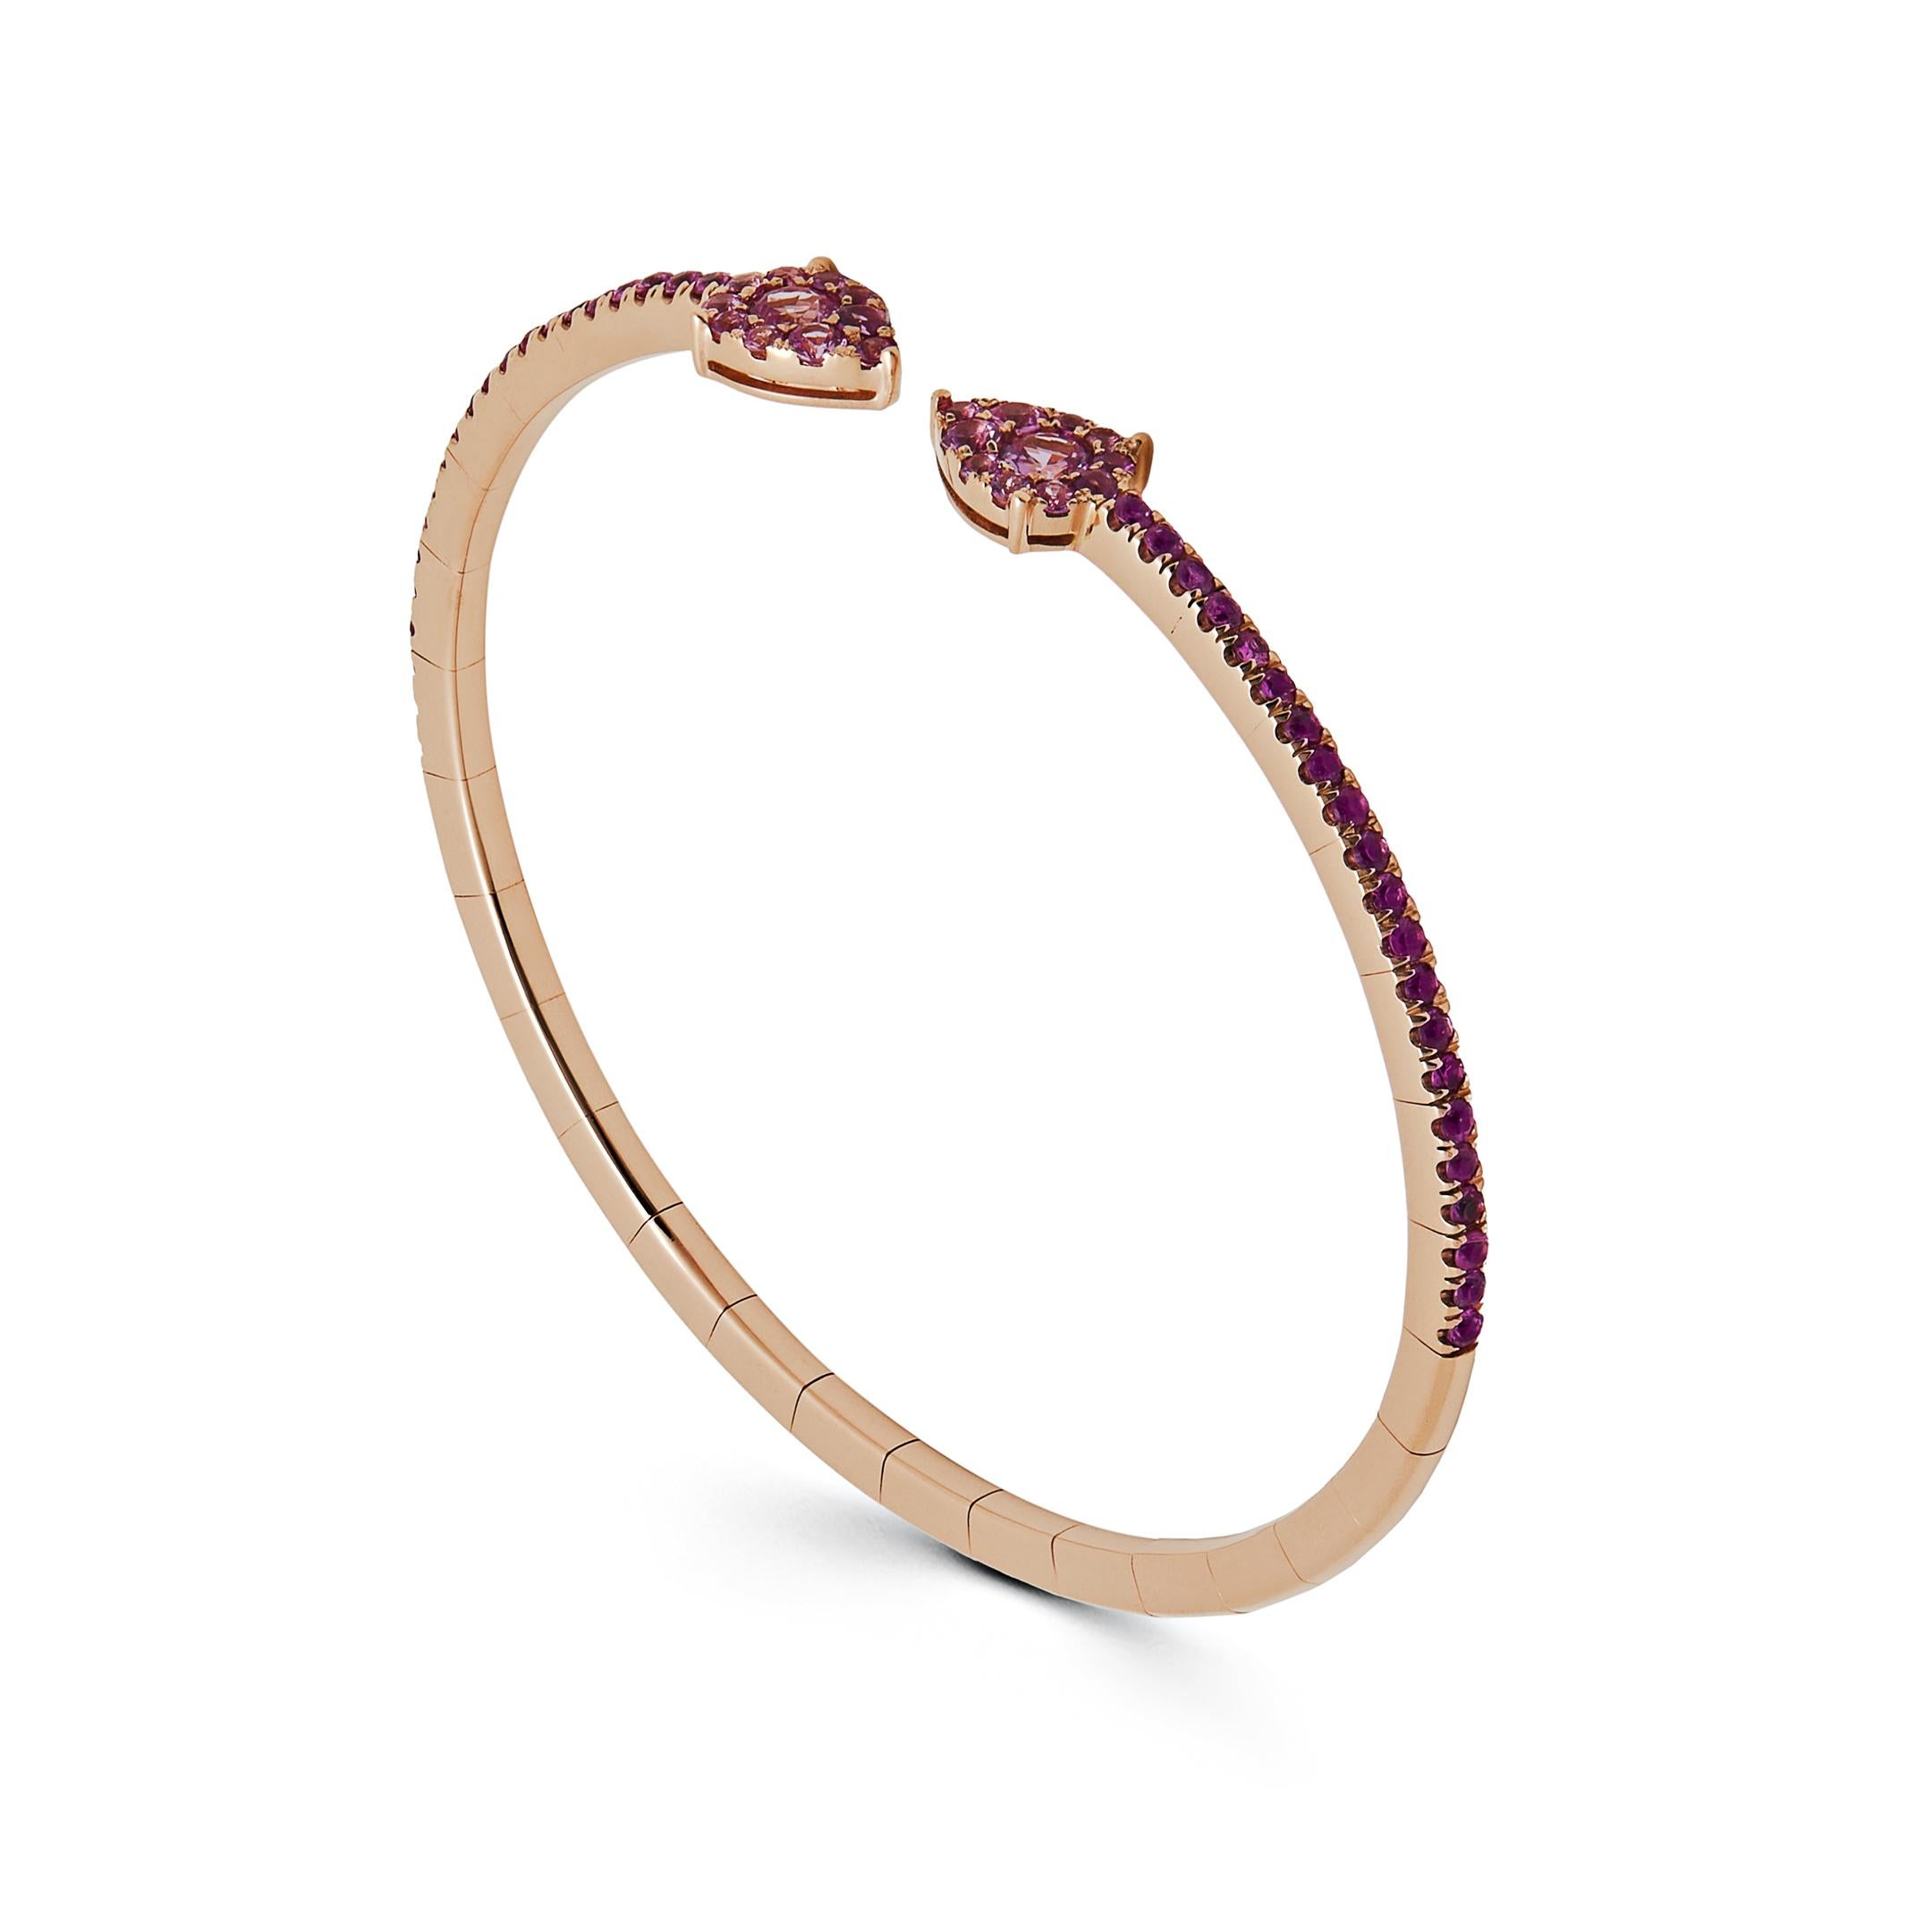 The epitome of effortless glamour, the Pink Sapphire Flexible Cuff Bracelet is the ideal layering piece. Thanks to its stretchy technology, the 18-karat rose gold and pink sapphire jewel can be comfortably slipped on and off. Pair several of these